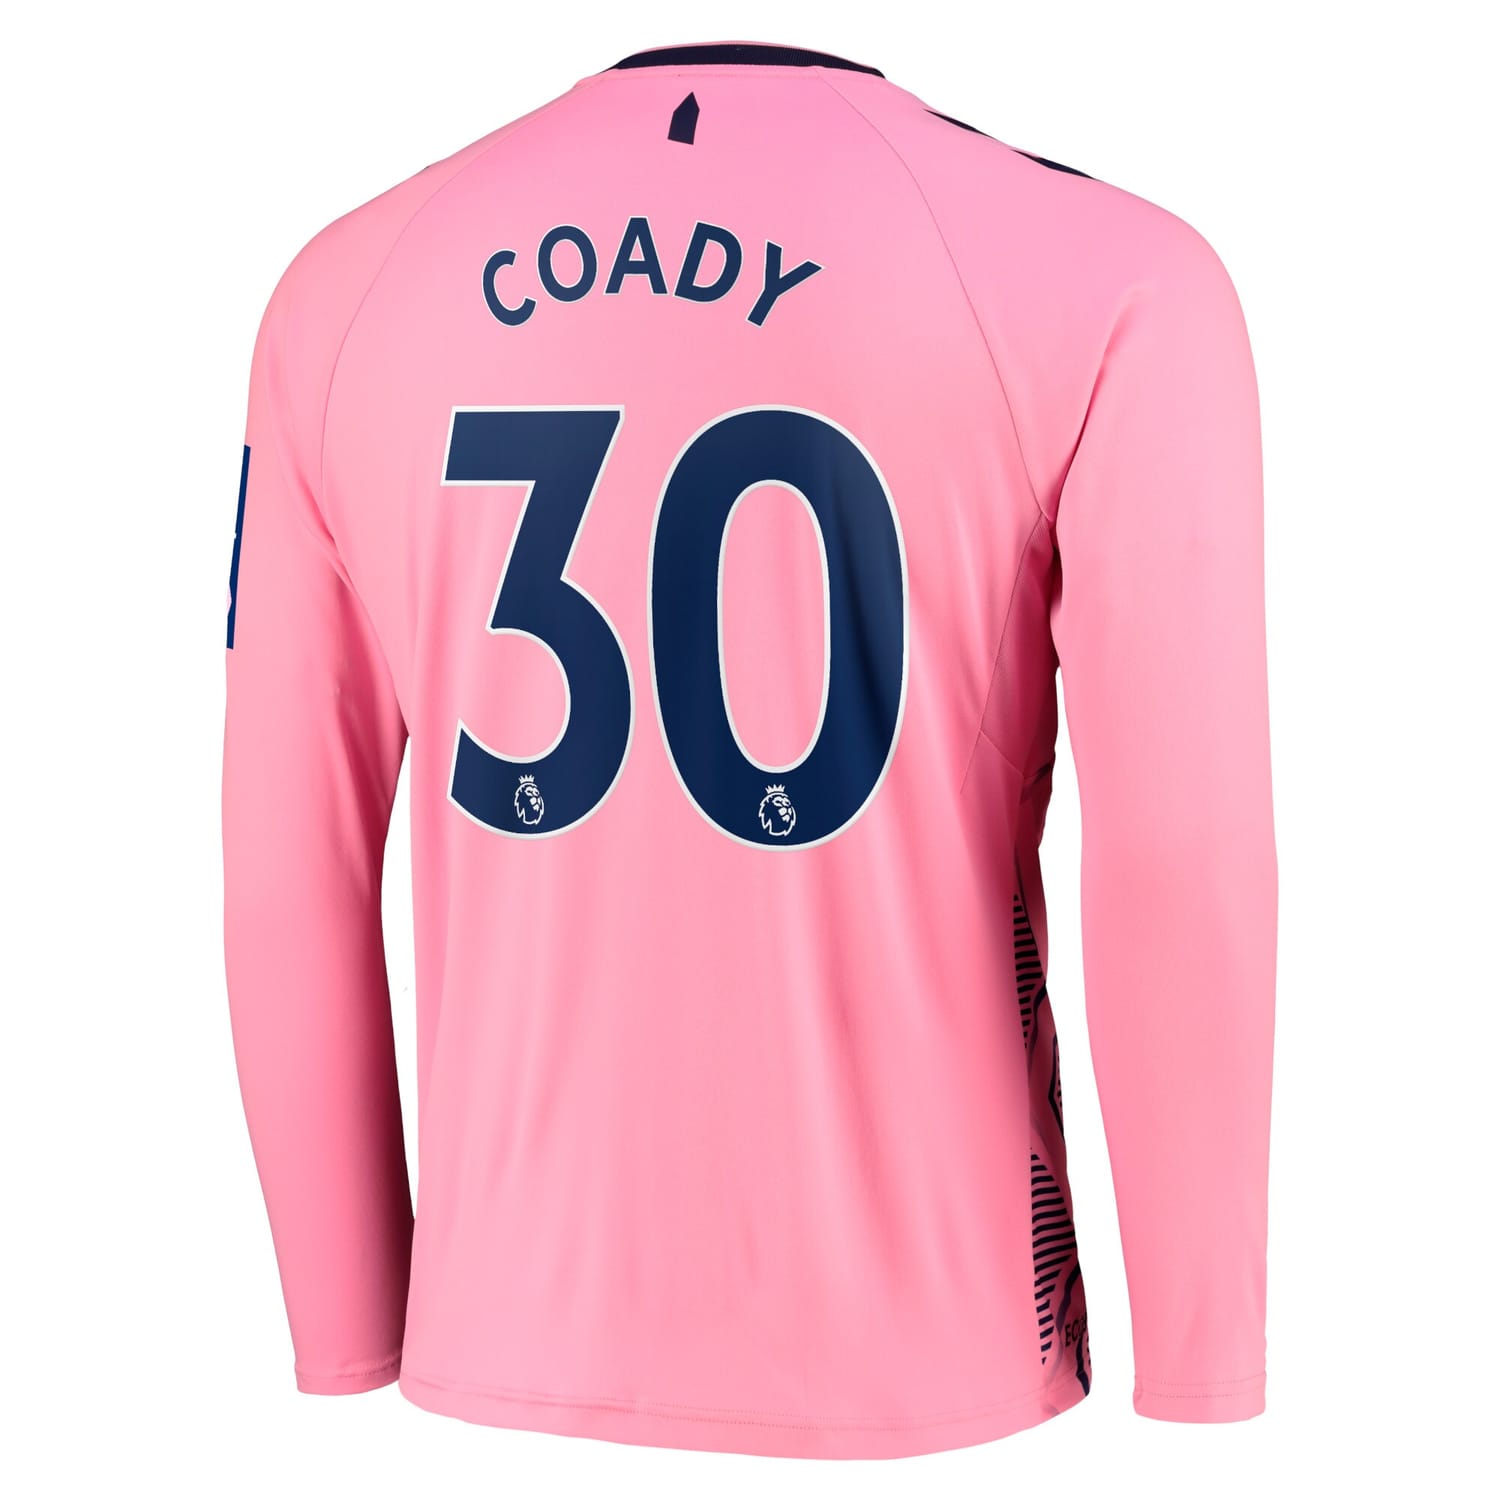 Premier League Everton Away Jersey Shirt Long Sleeve 2022-23 player Conor Coady 30 printing for Men